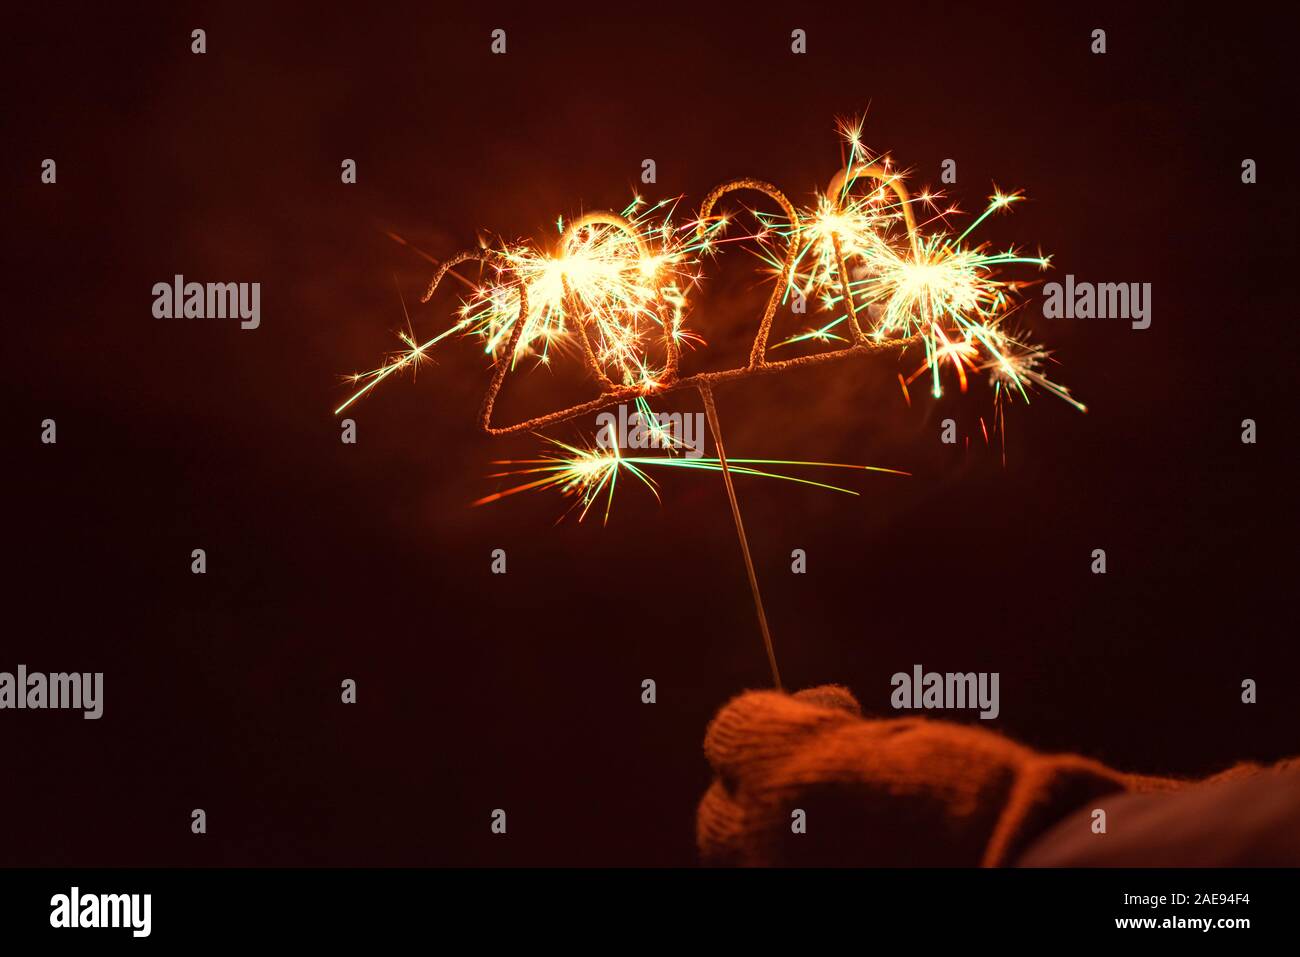 Human hand with glove holding an igniting 2020 Shaped Sparkler, outdoors at night Stock Photo